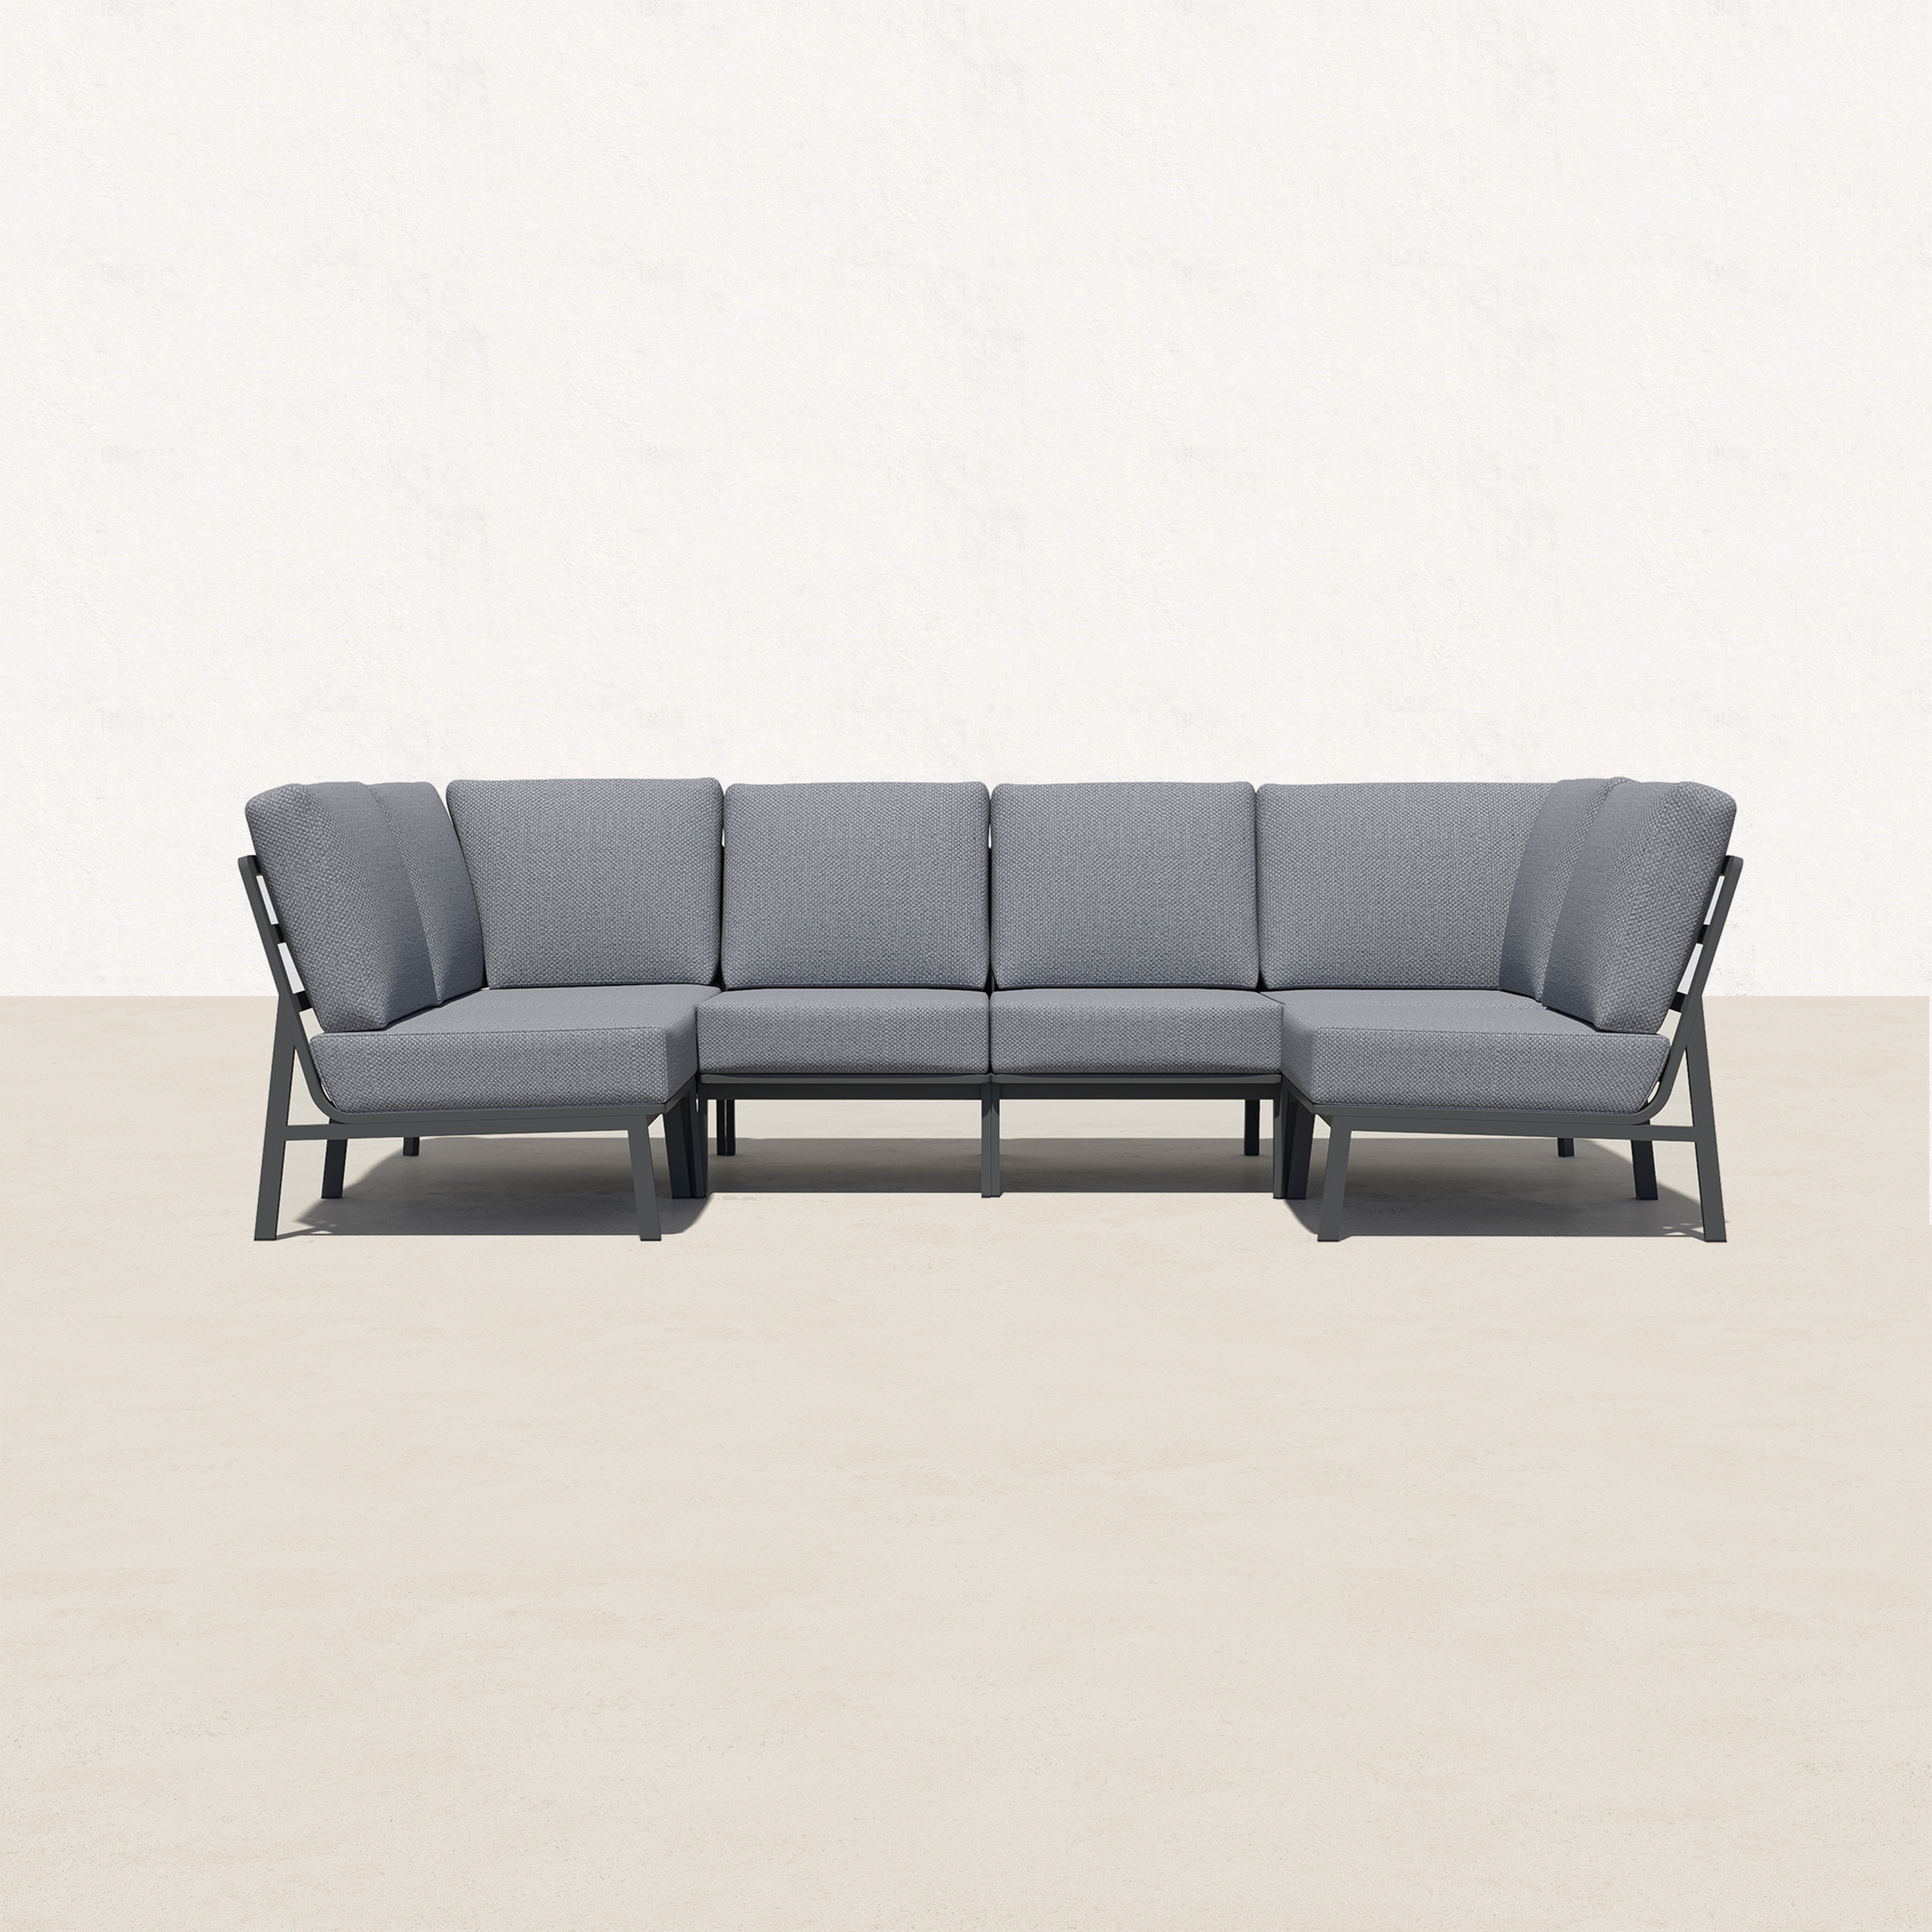 Orion Outdoor U Sectional - 6 Seat